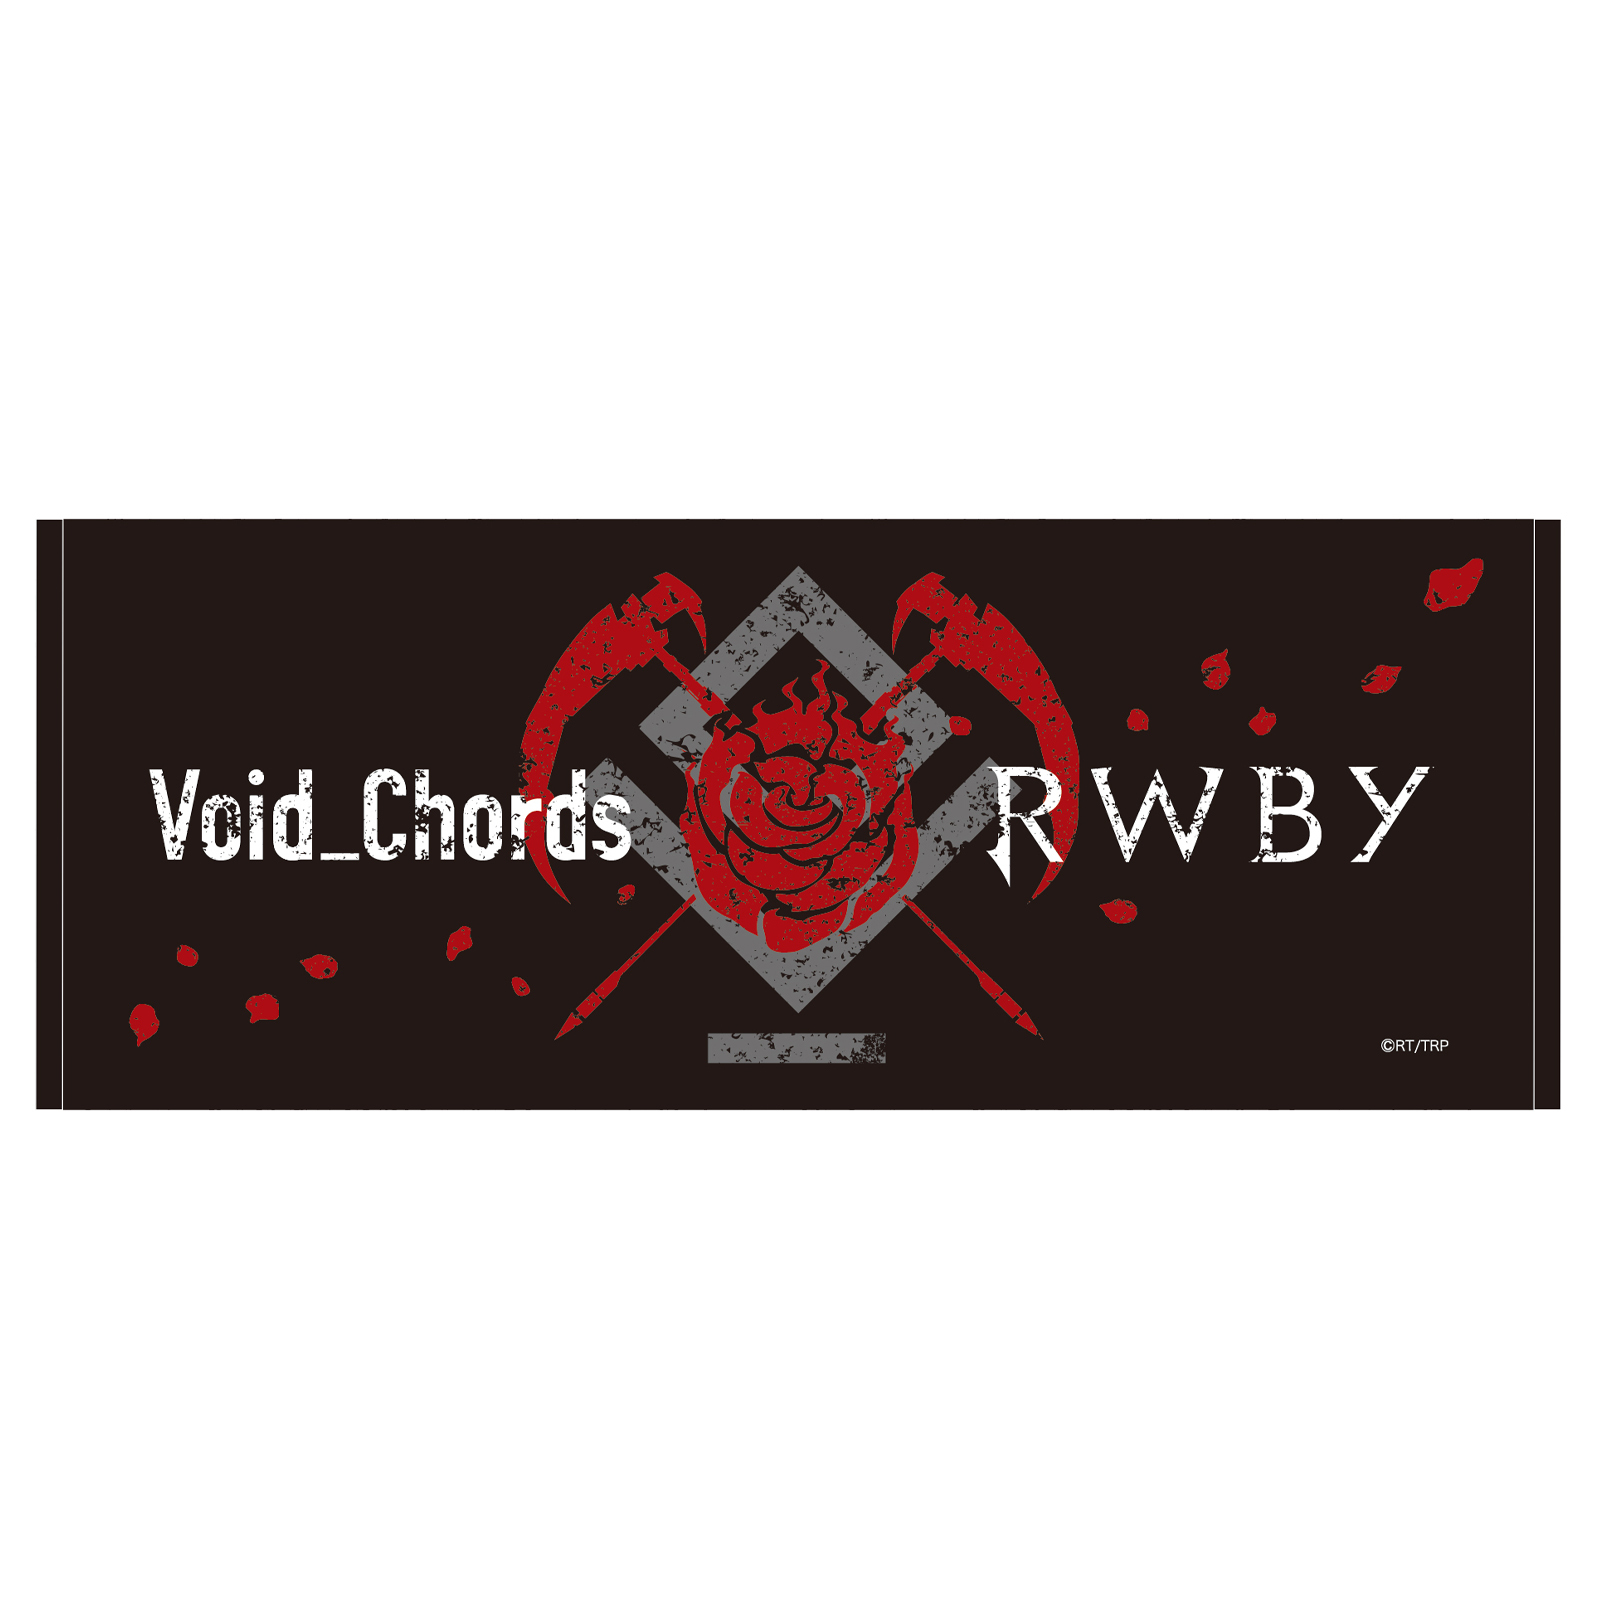 (C)2022 Rooster Teeth Productions, LLC/Team RWBY Project